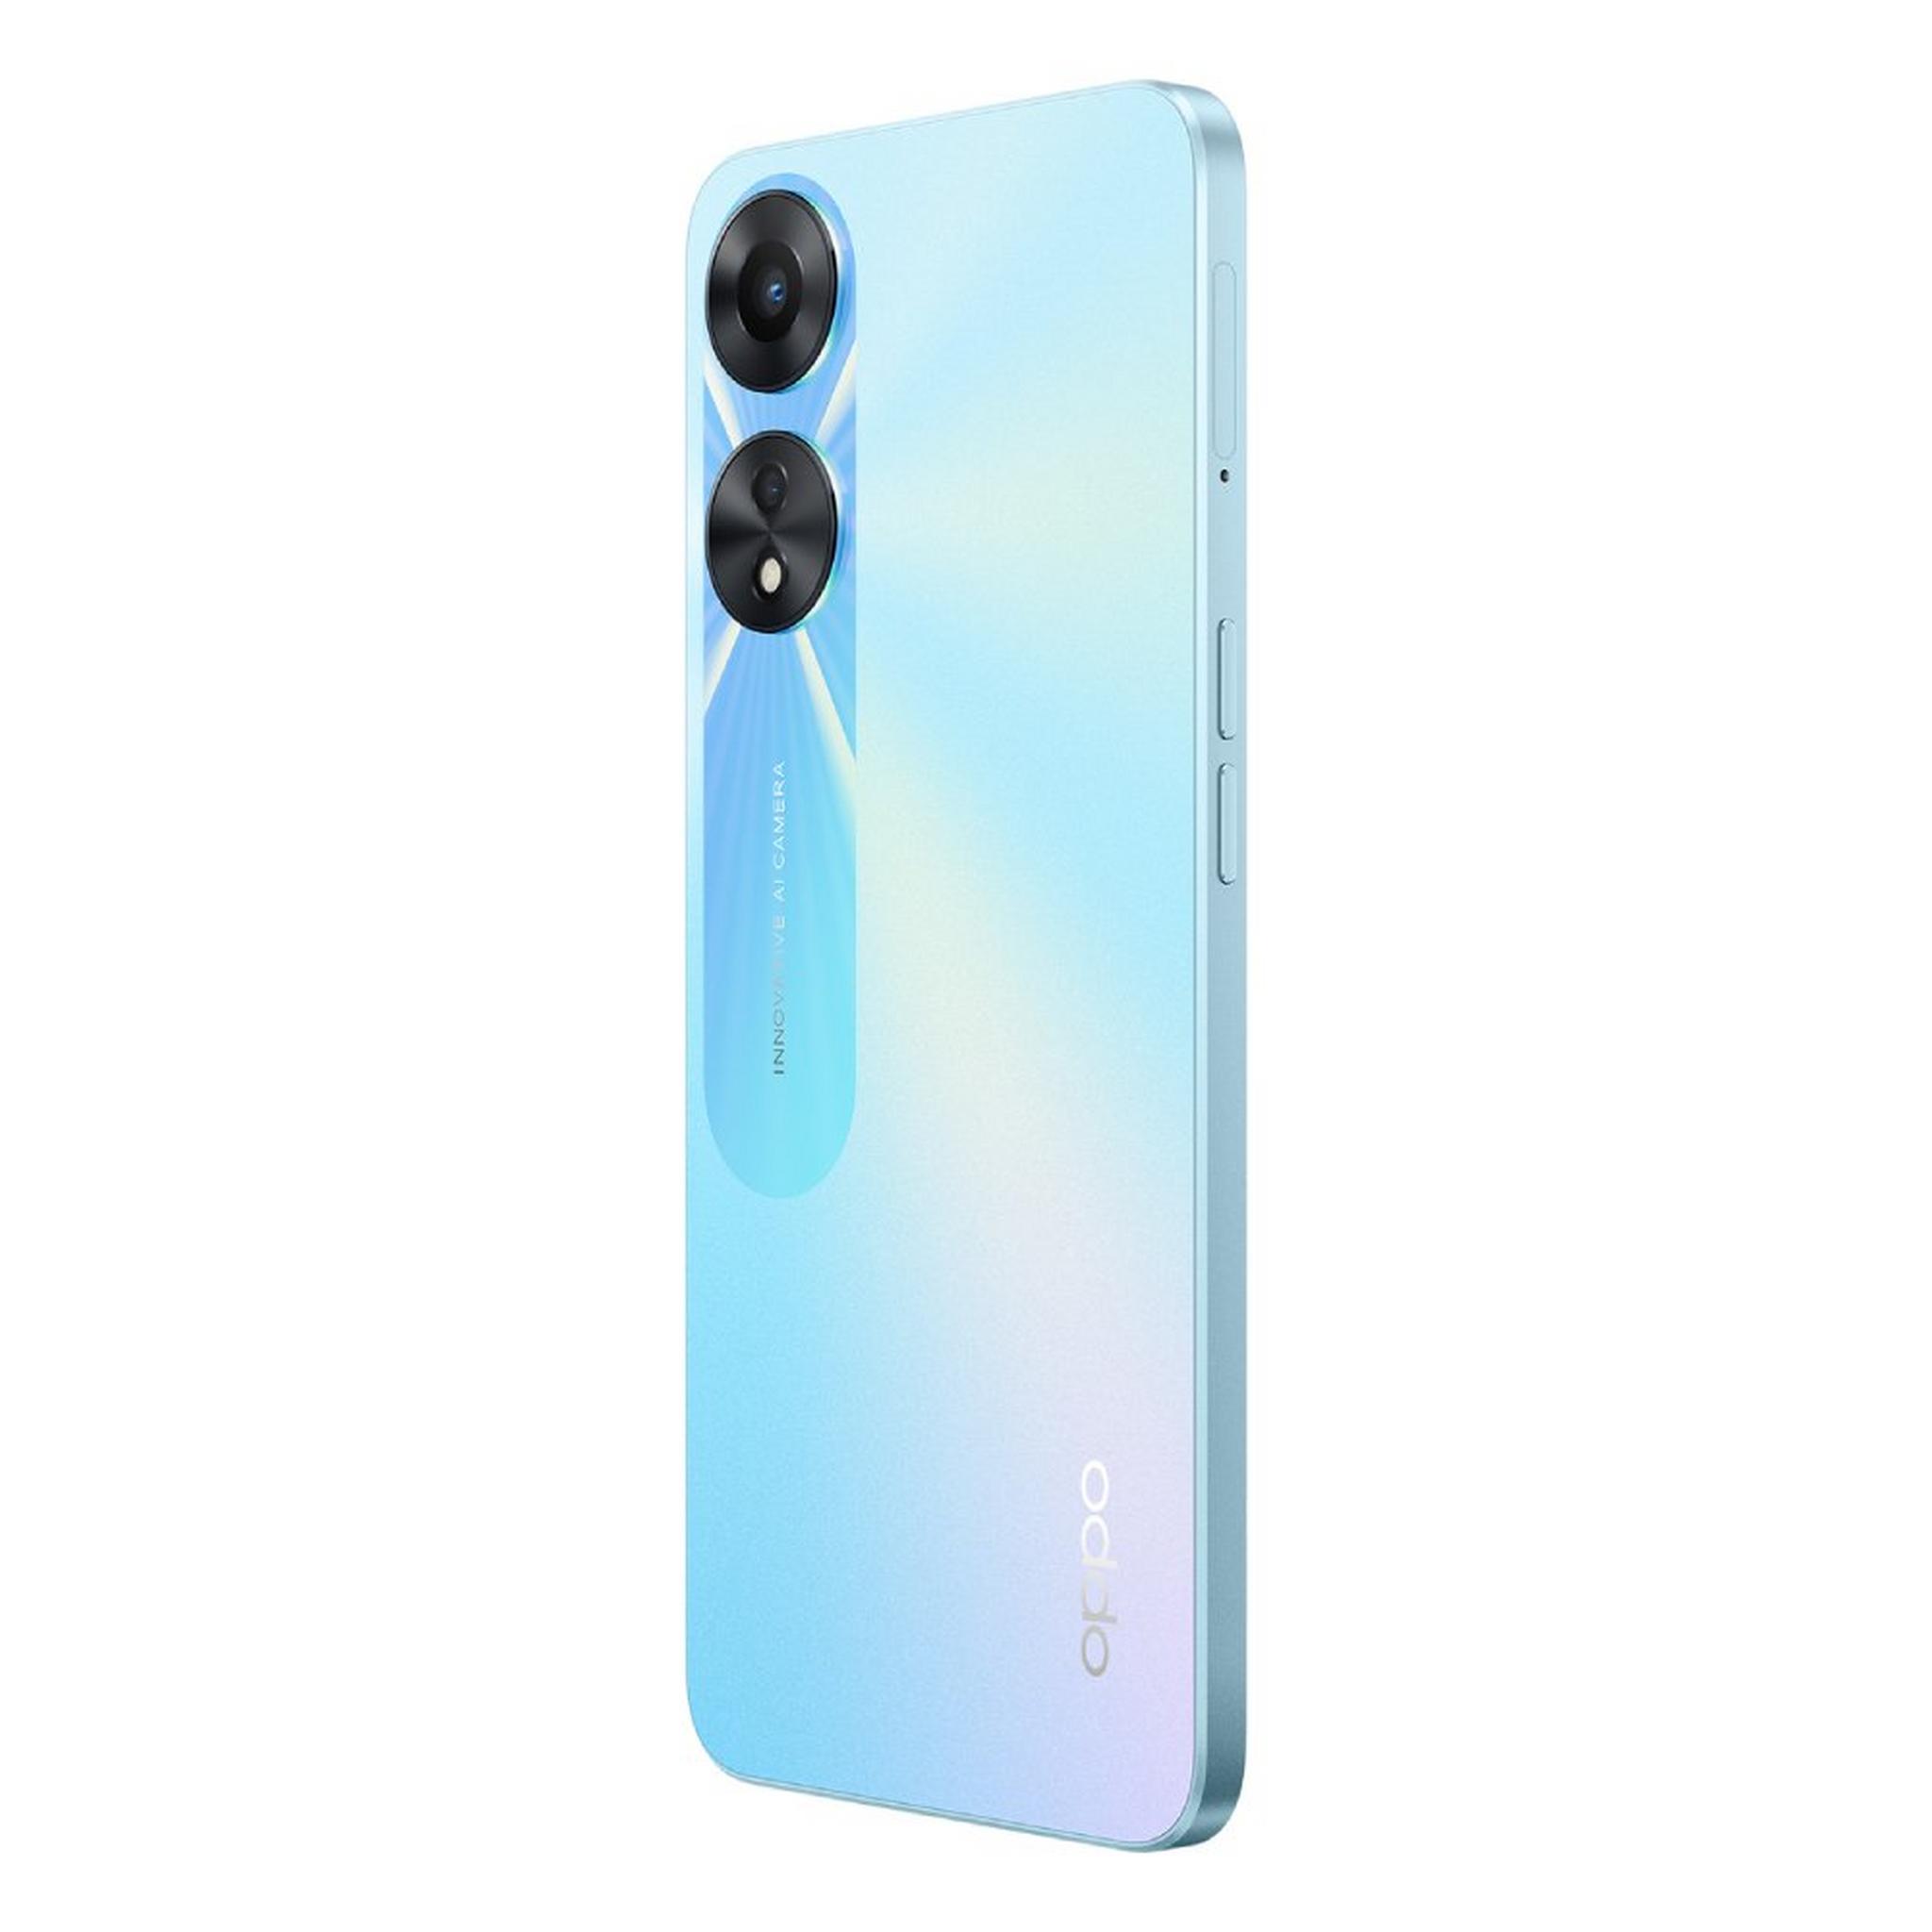 Oppo A78 128GB Phone - Glowing Blue